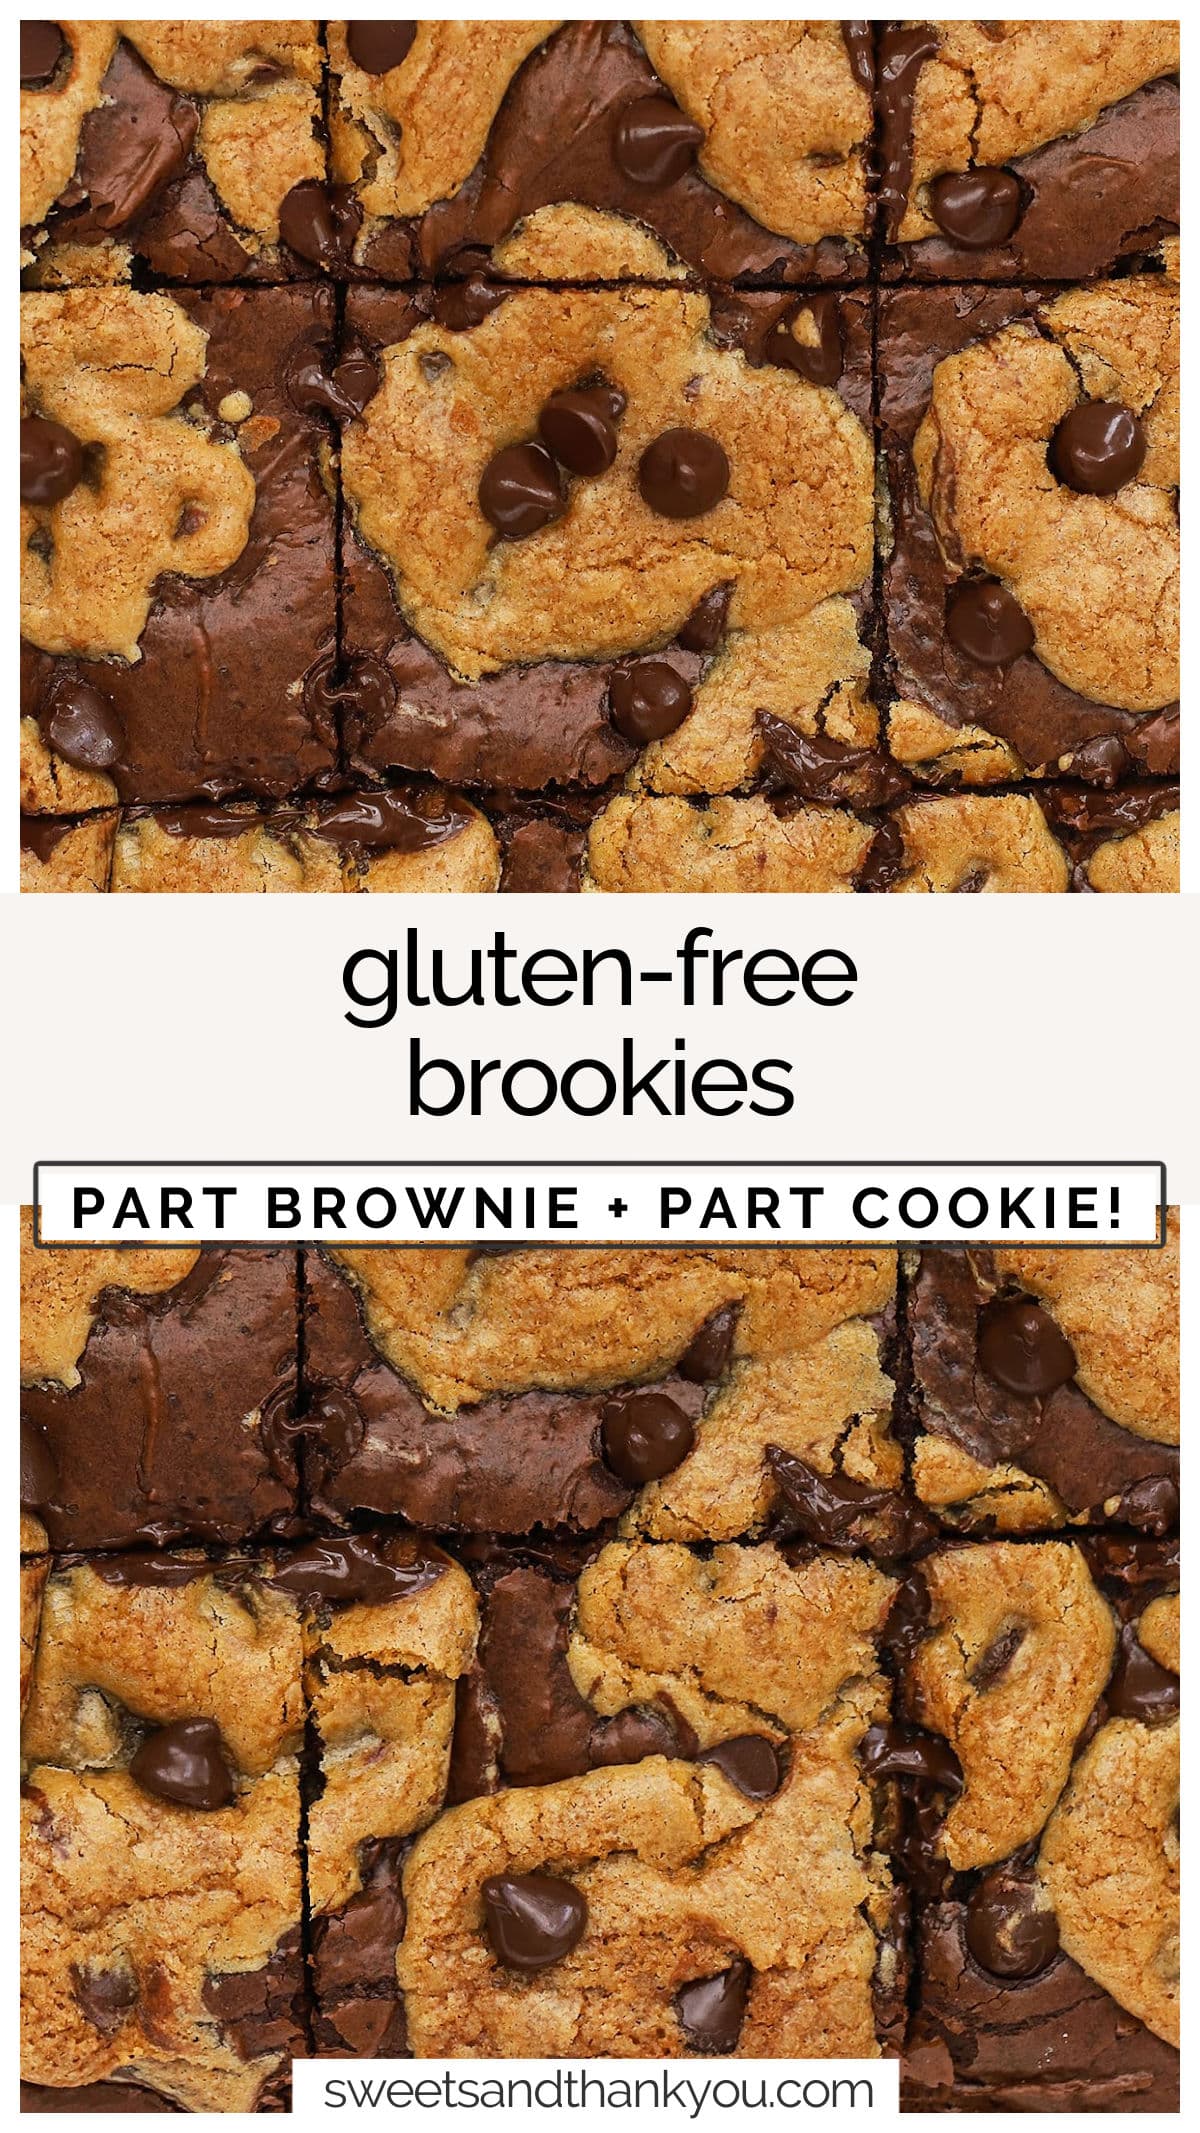 These Gluten-Free Brookies are part brownie and part cookie, for a delicious, decadent dessert that gives you the best of both worlds in every bite! We combine classic chocolate chip cookie flavor with decadent fudgy brownies for one amazing gluten-free cookie bar that's perfect for sharing. Enjoy it on its own, or turn it into an ice cream sundae for an even more indulgent treat!